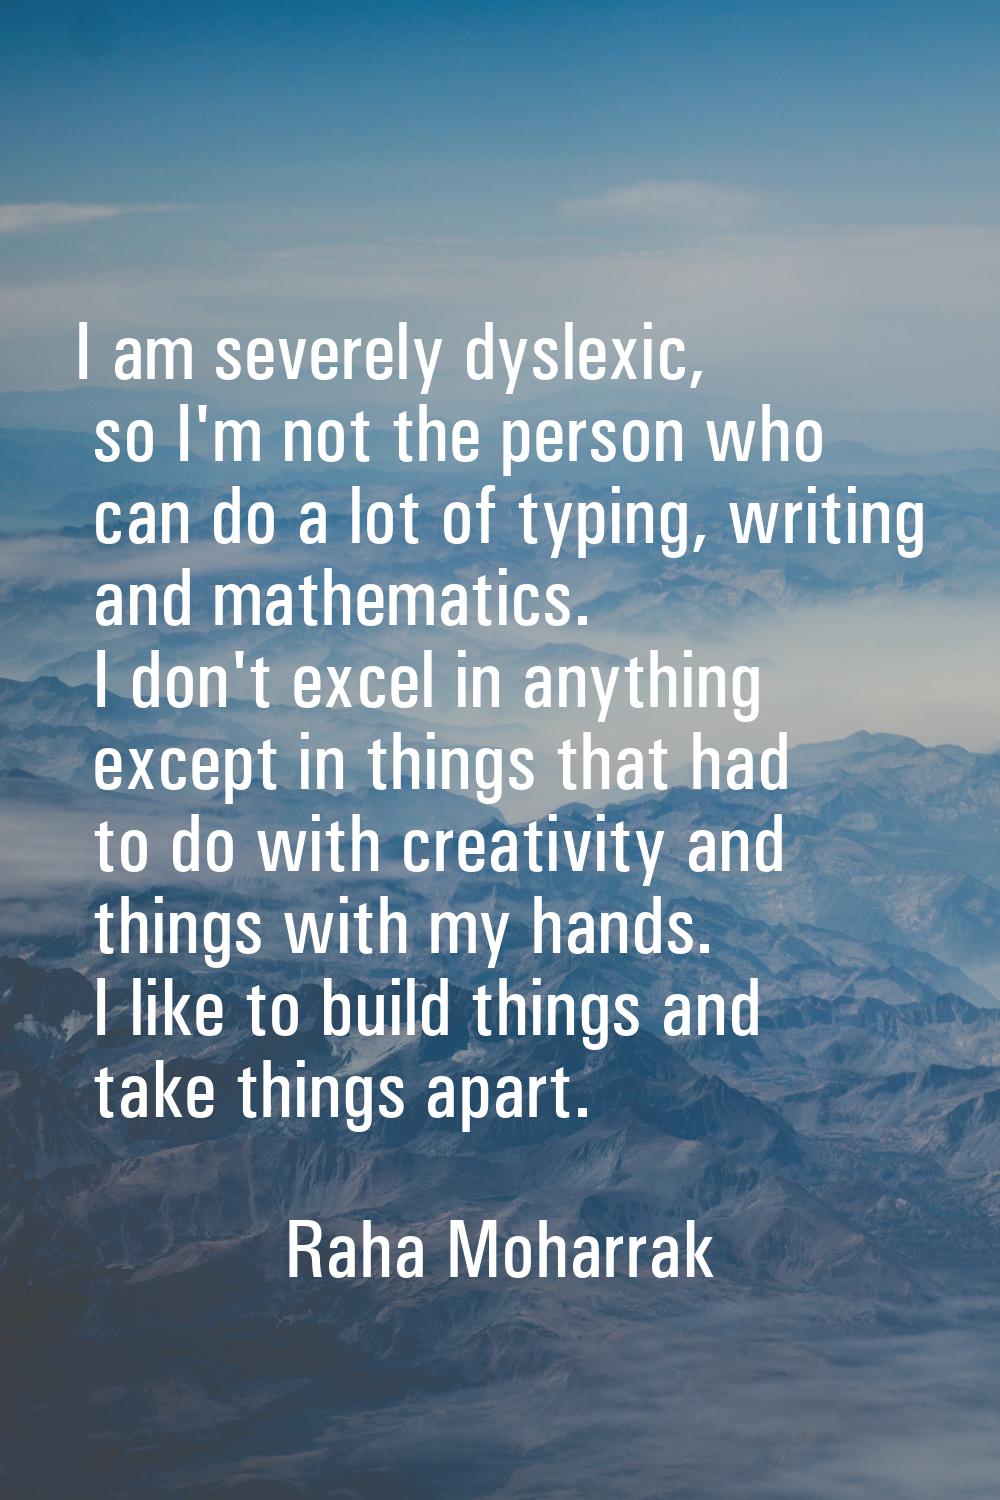 I am severely dyslexic, so I'm not the person who can do a lot of typing, writing and mathematics. 